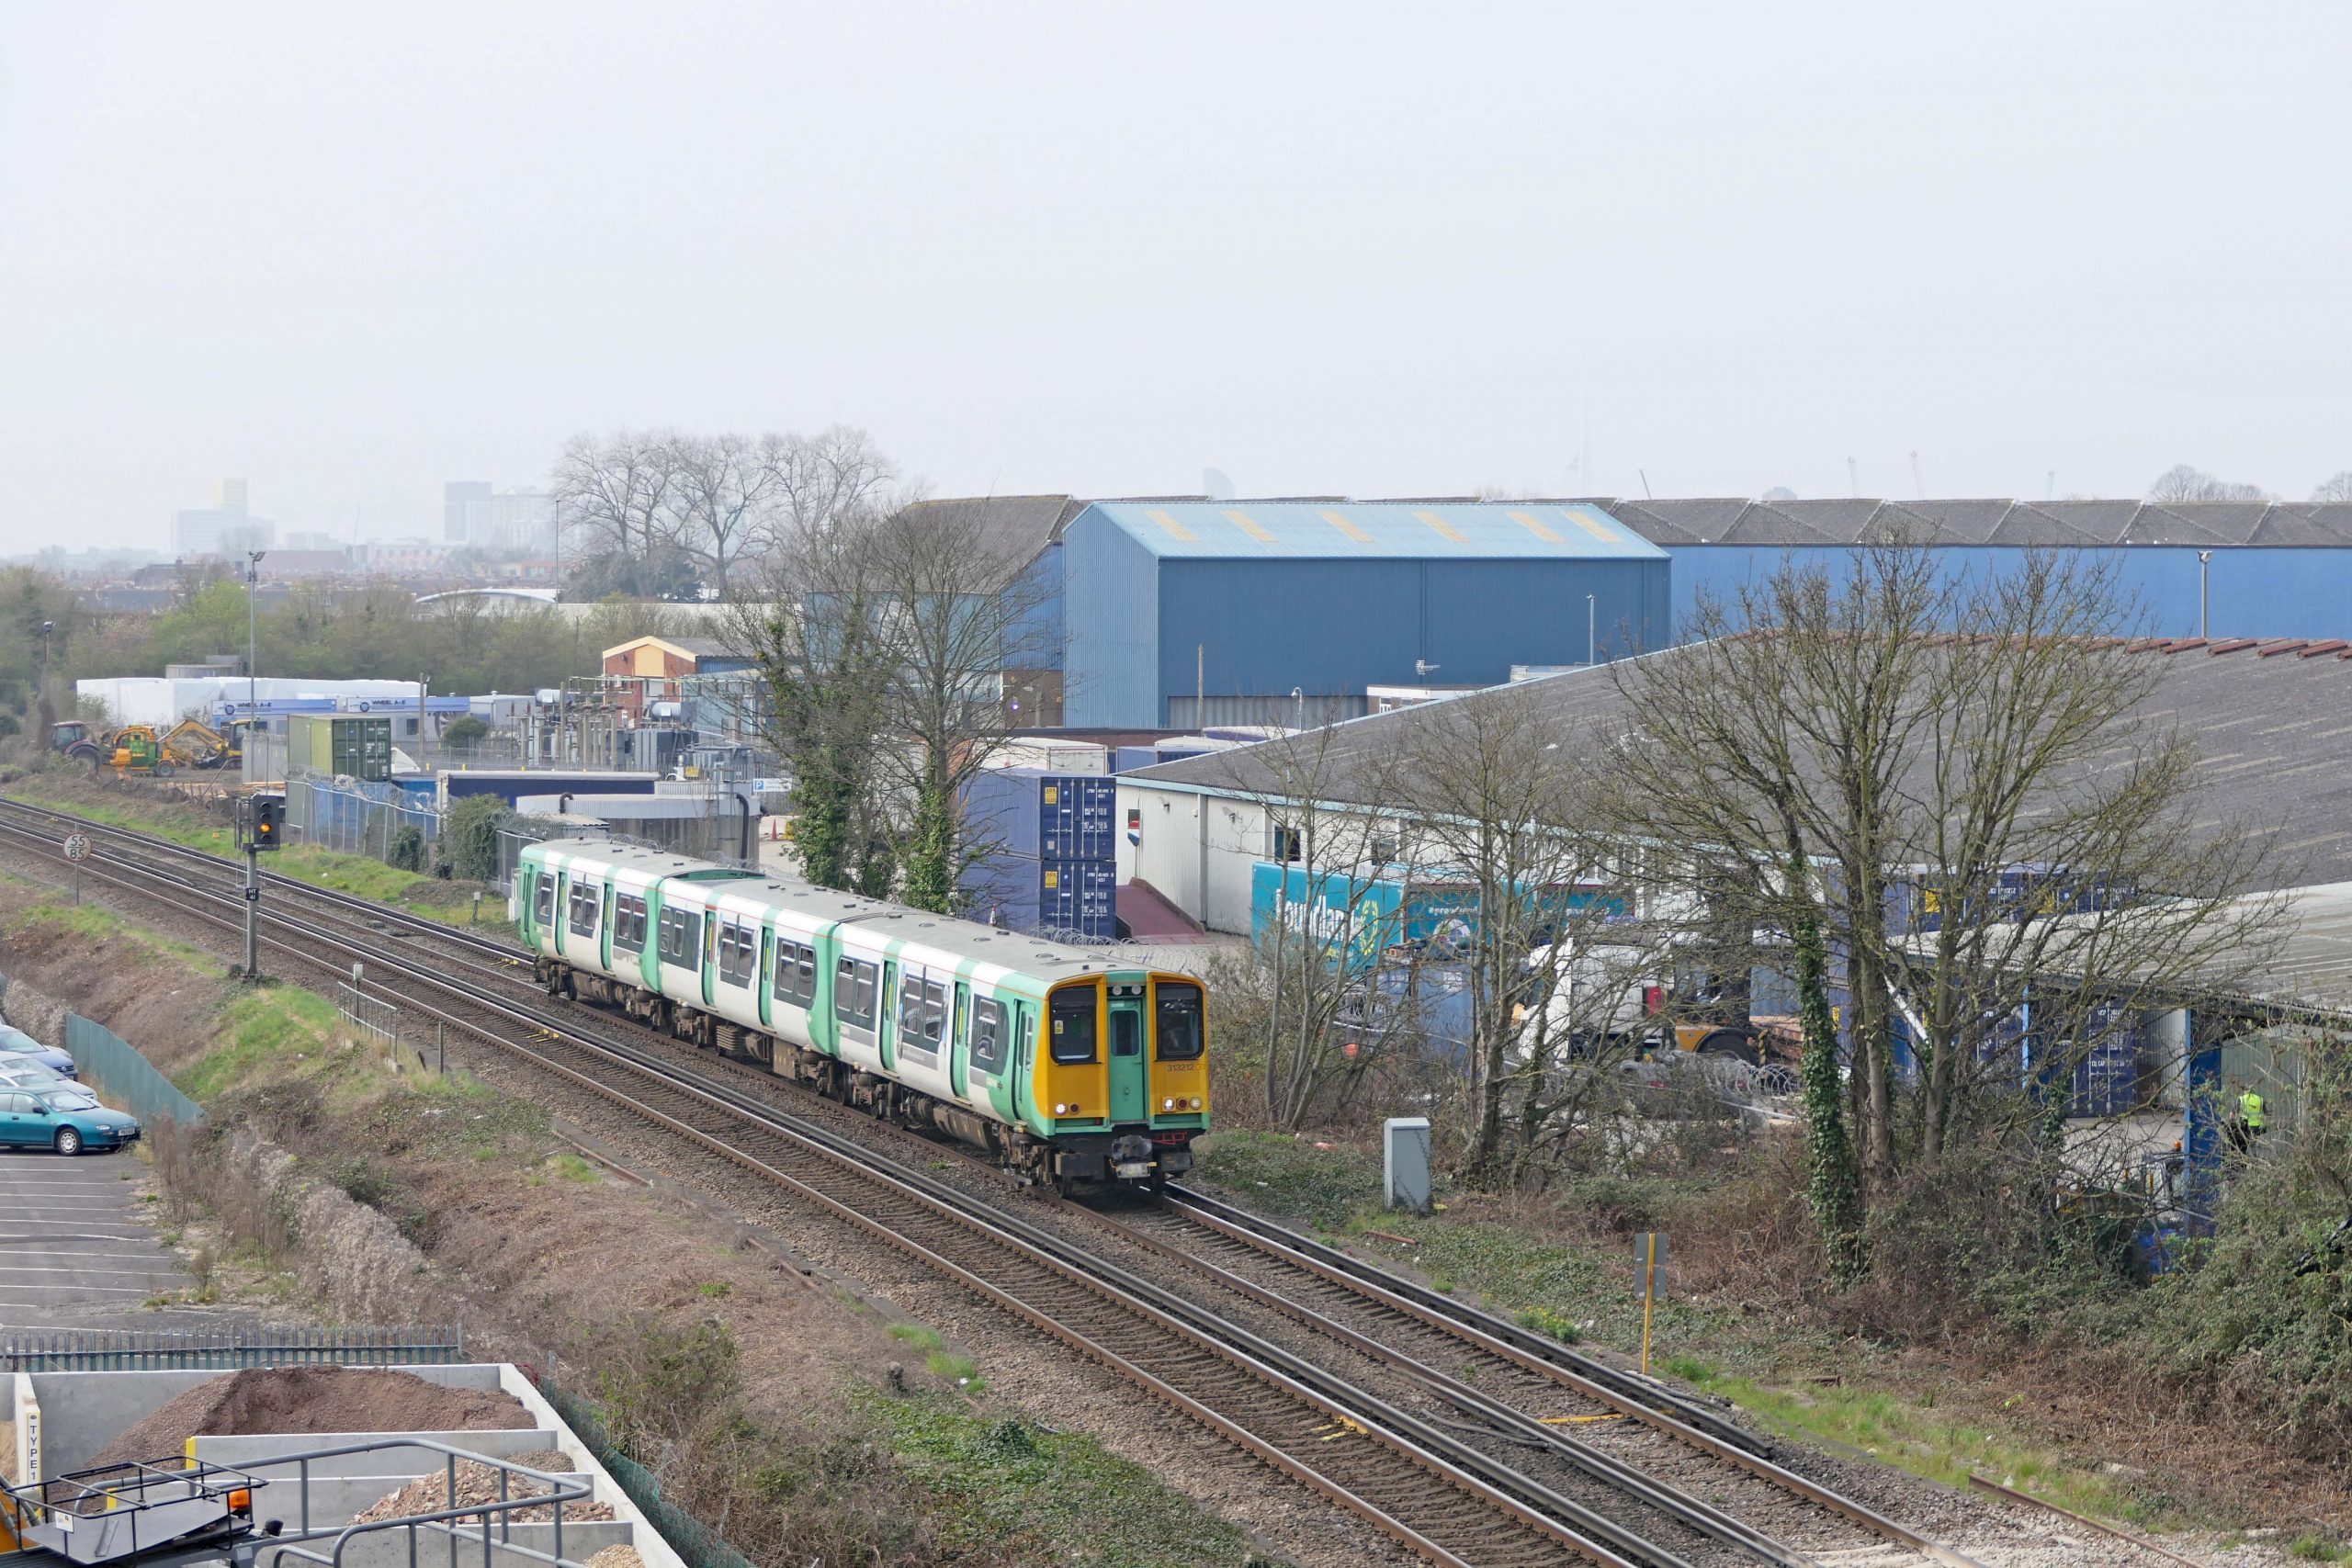 313 212 pulls away from Hilsea with the 10:57 Portsmouth & Southsea to Littlehampton. 28 March 2022.